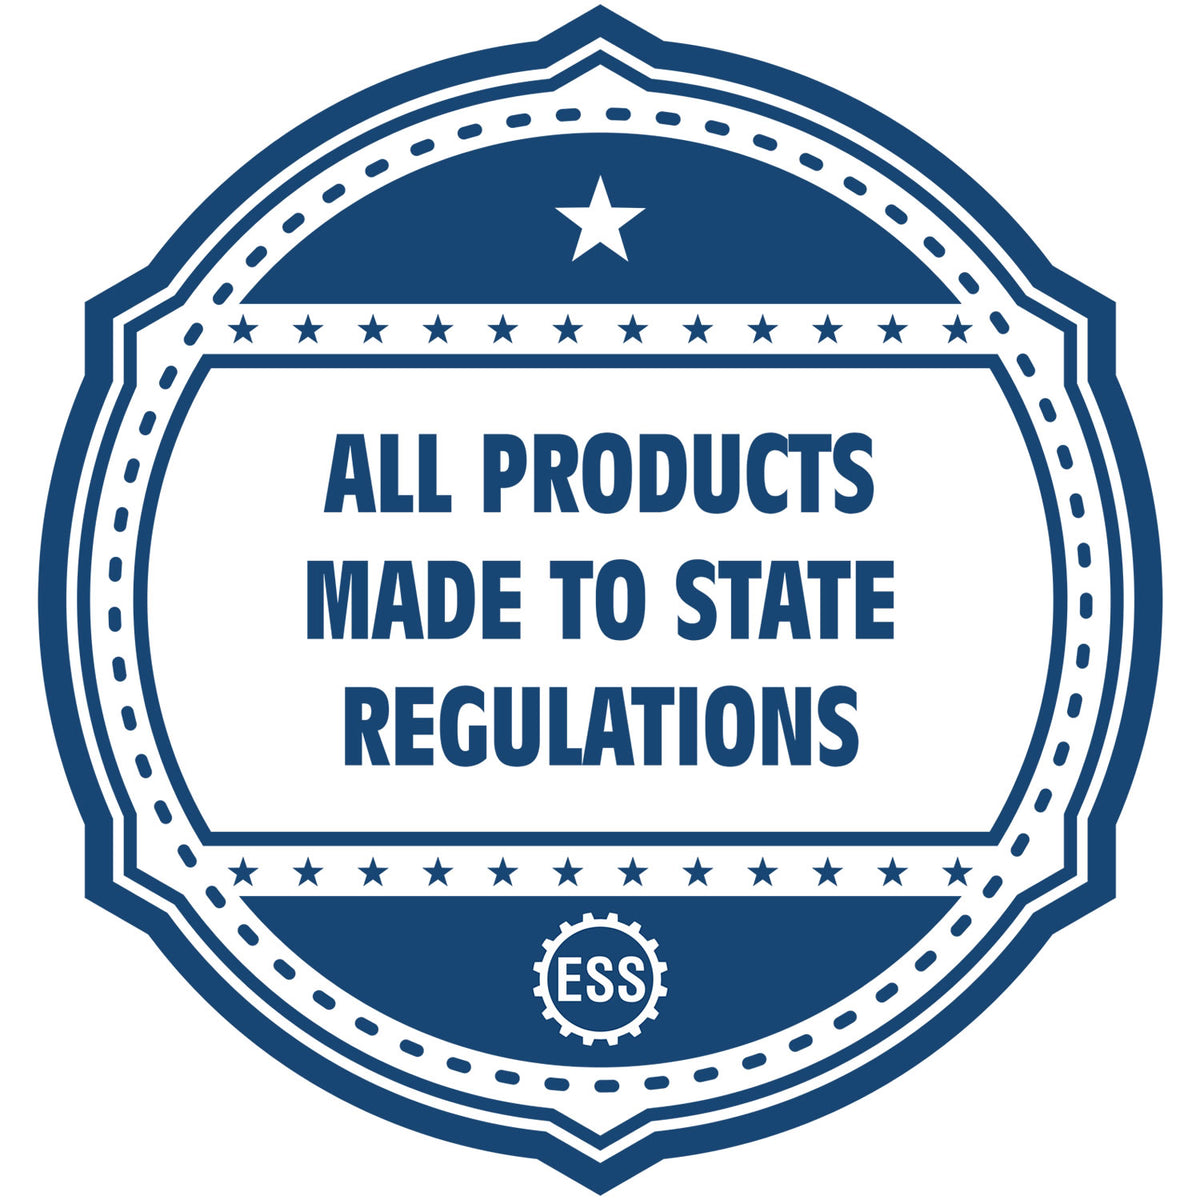 A blue icon or badge for the Hybrid Washington Engineer Seal showing that this product is made in compliance with state regulations.